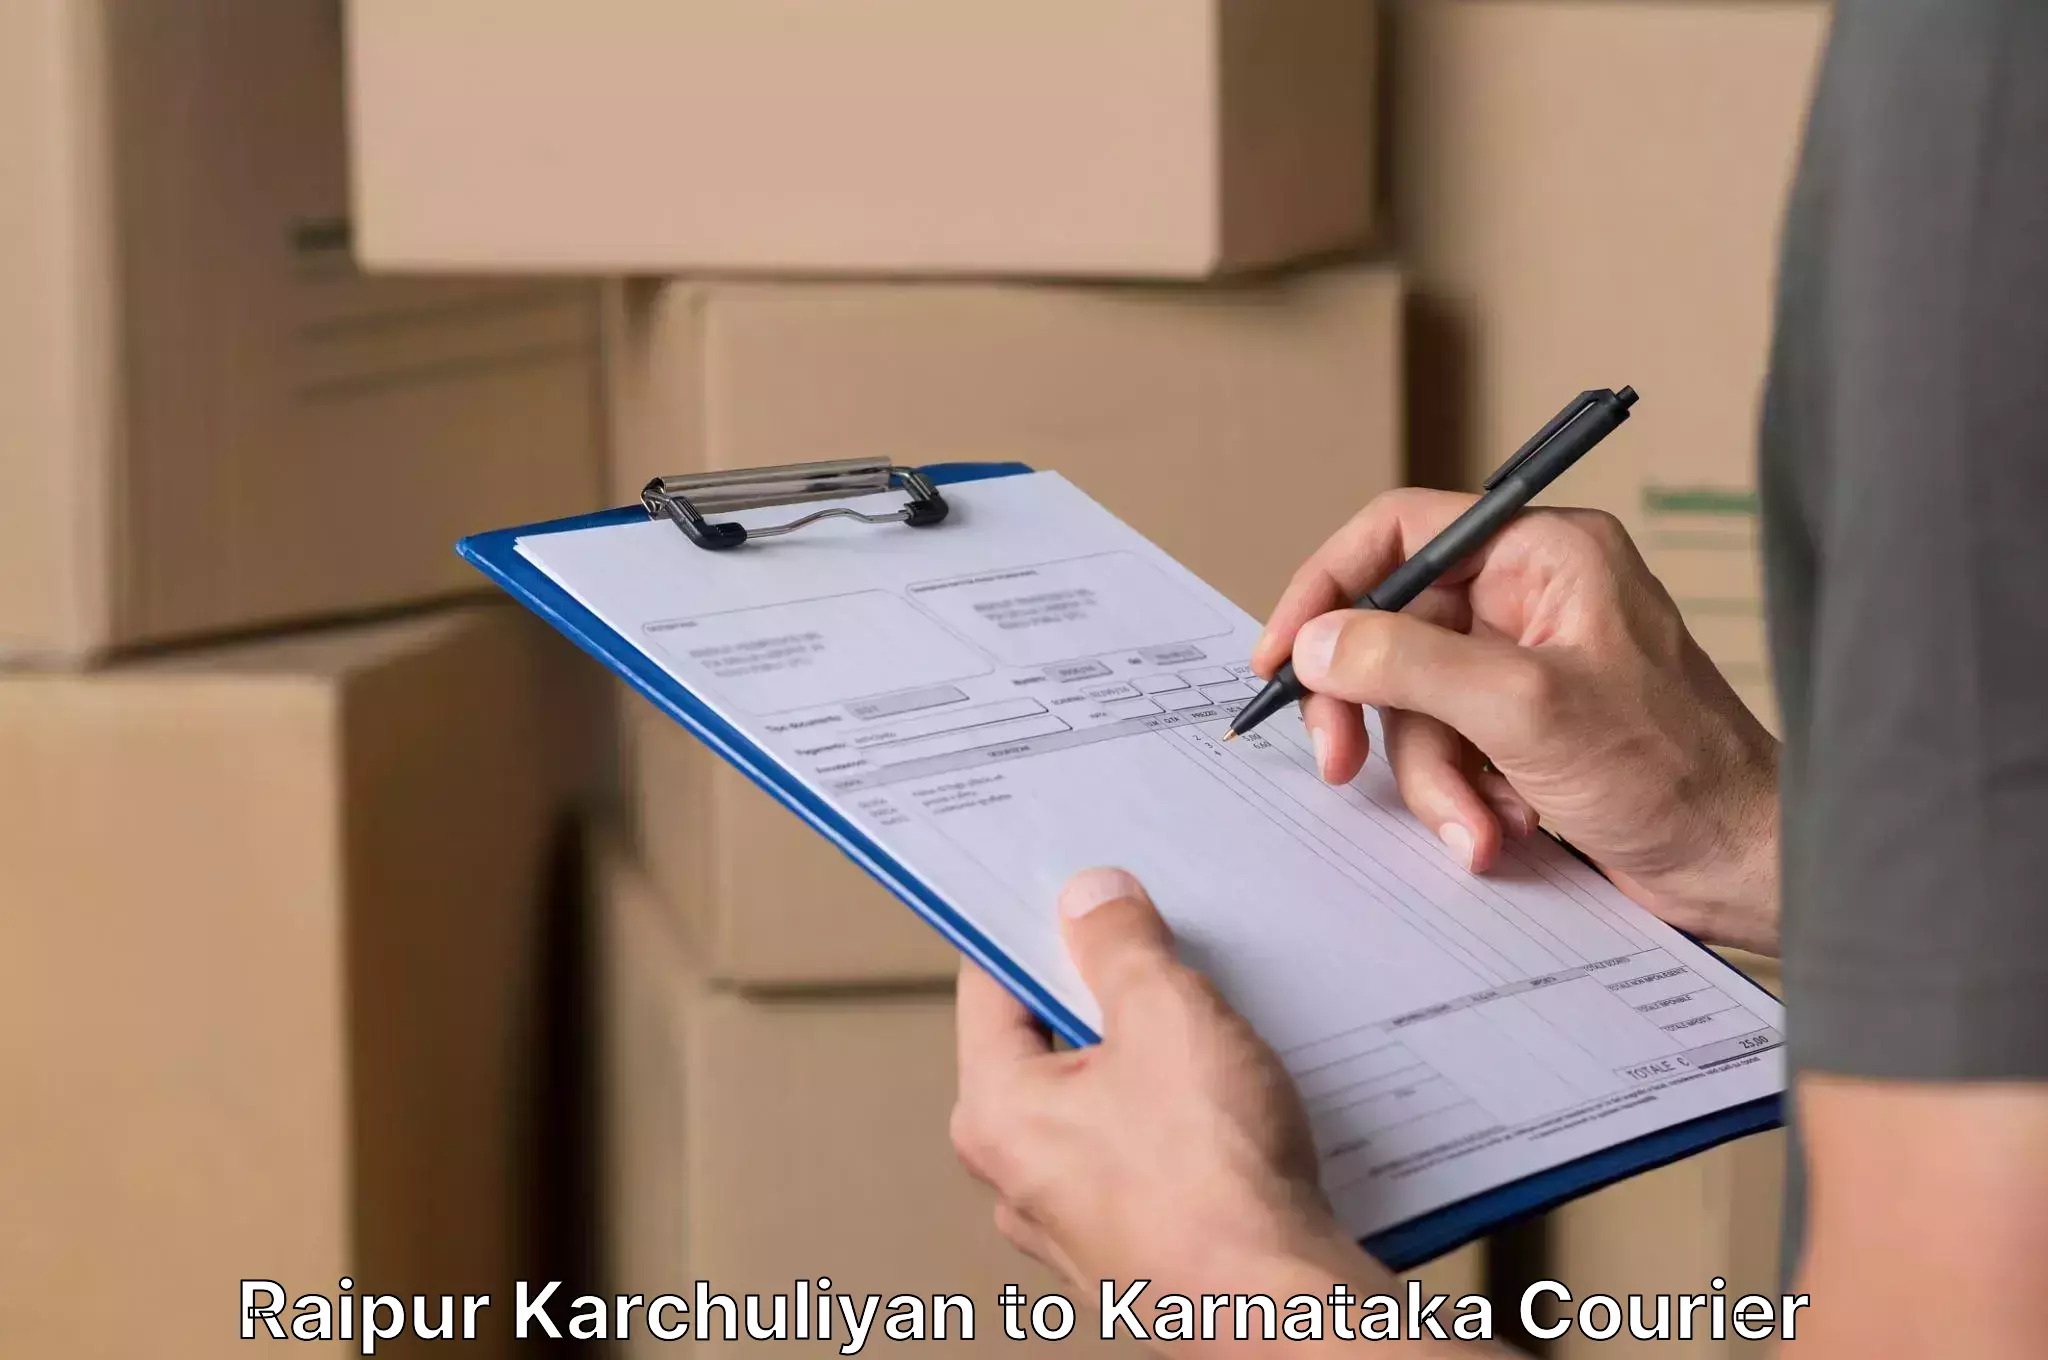 Customized relocation services Raipur Karchuliyan to Muddebihal